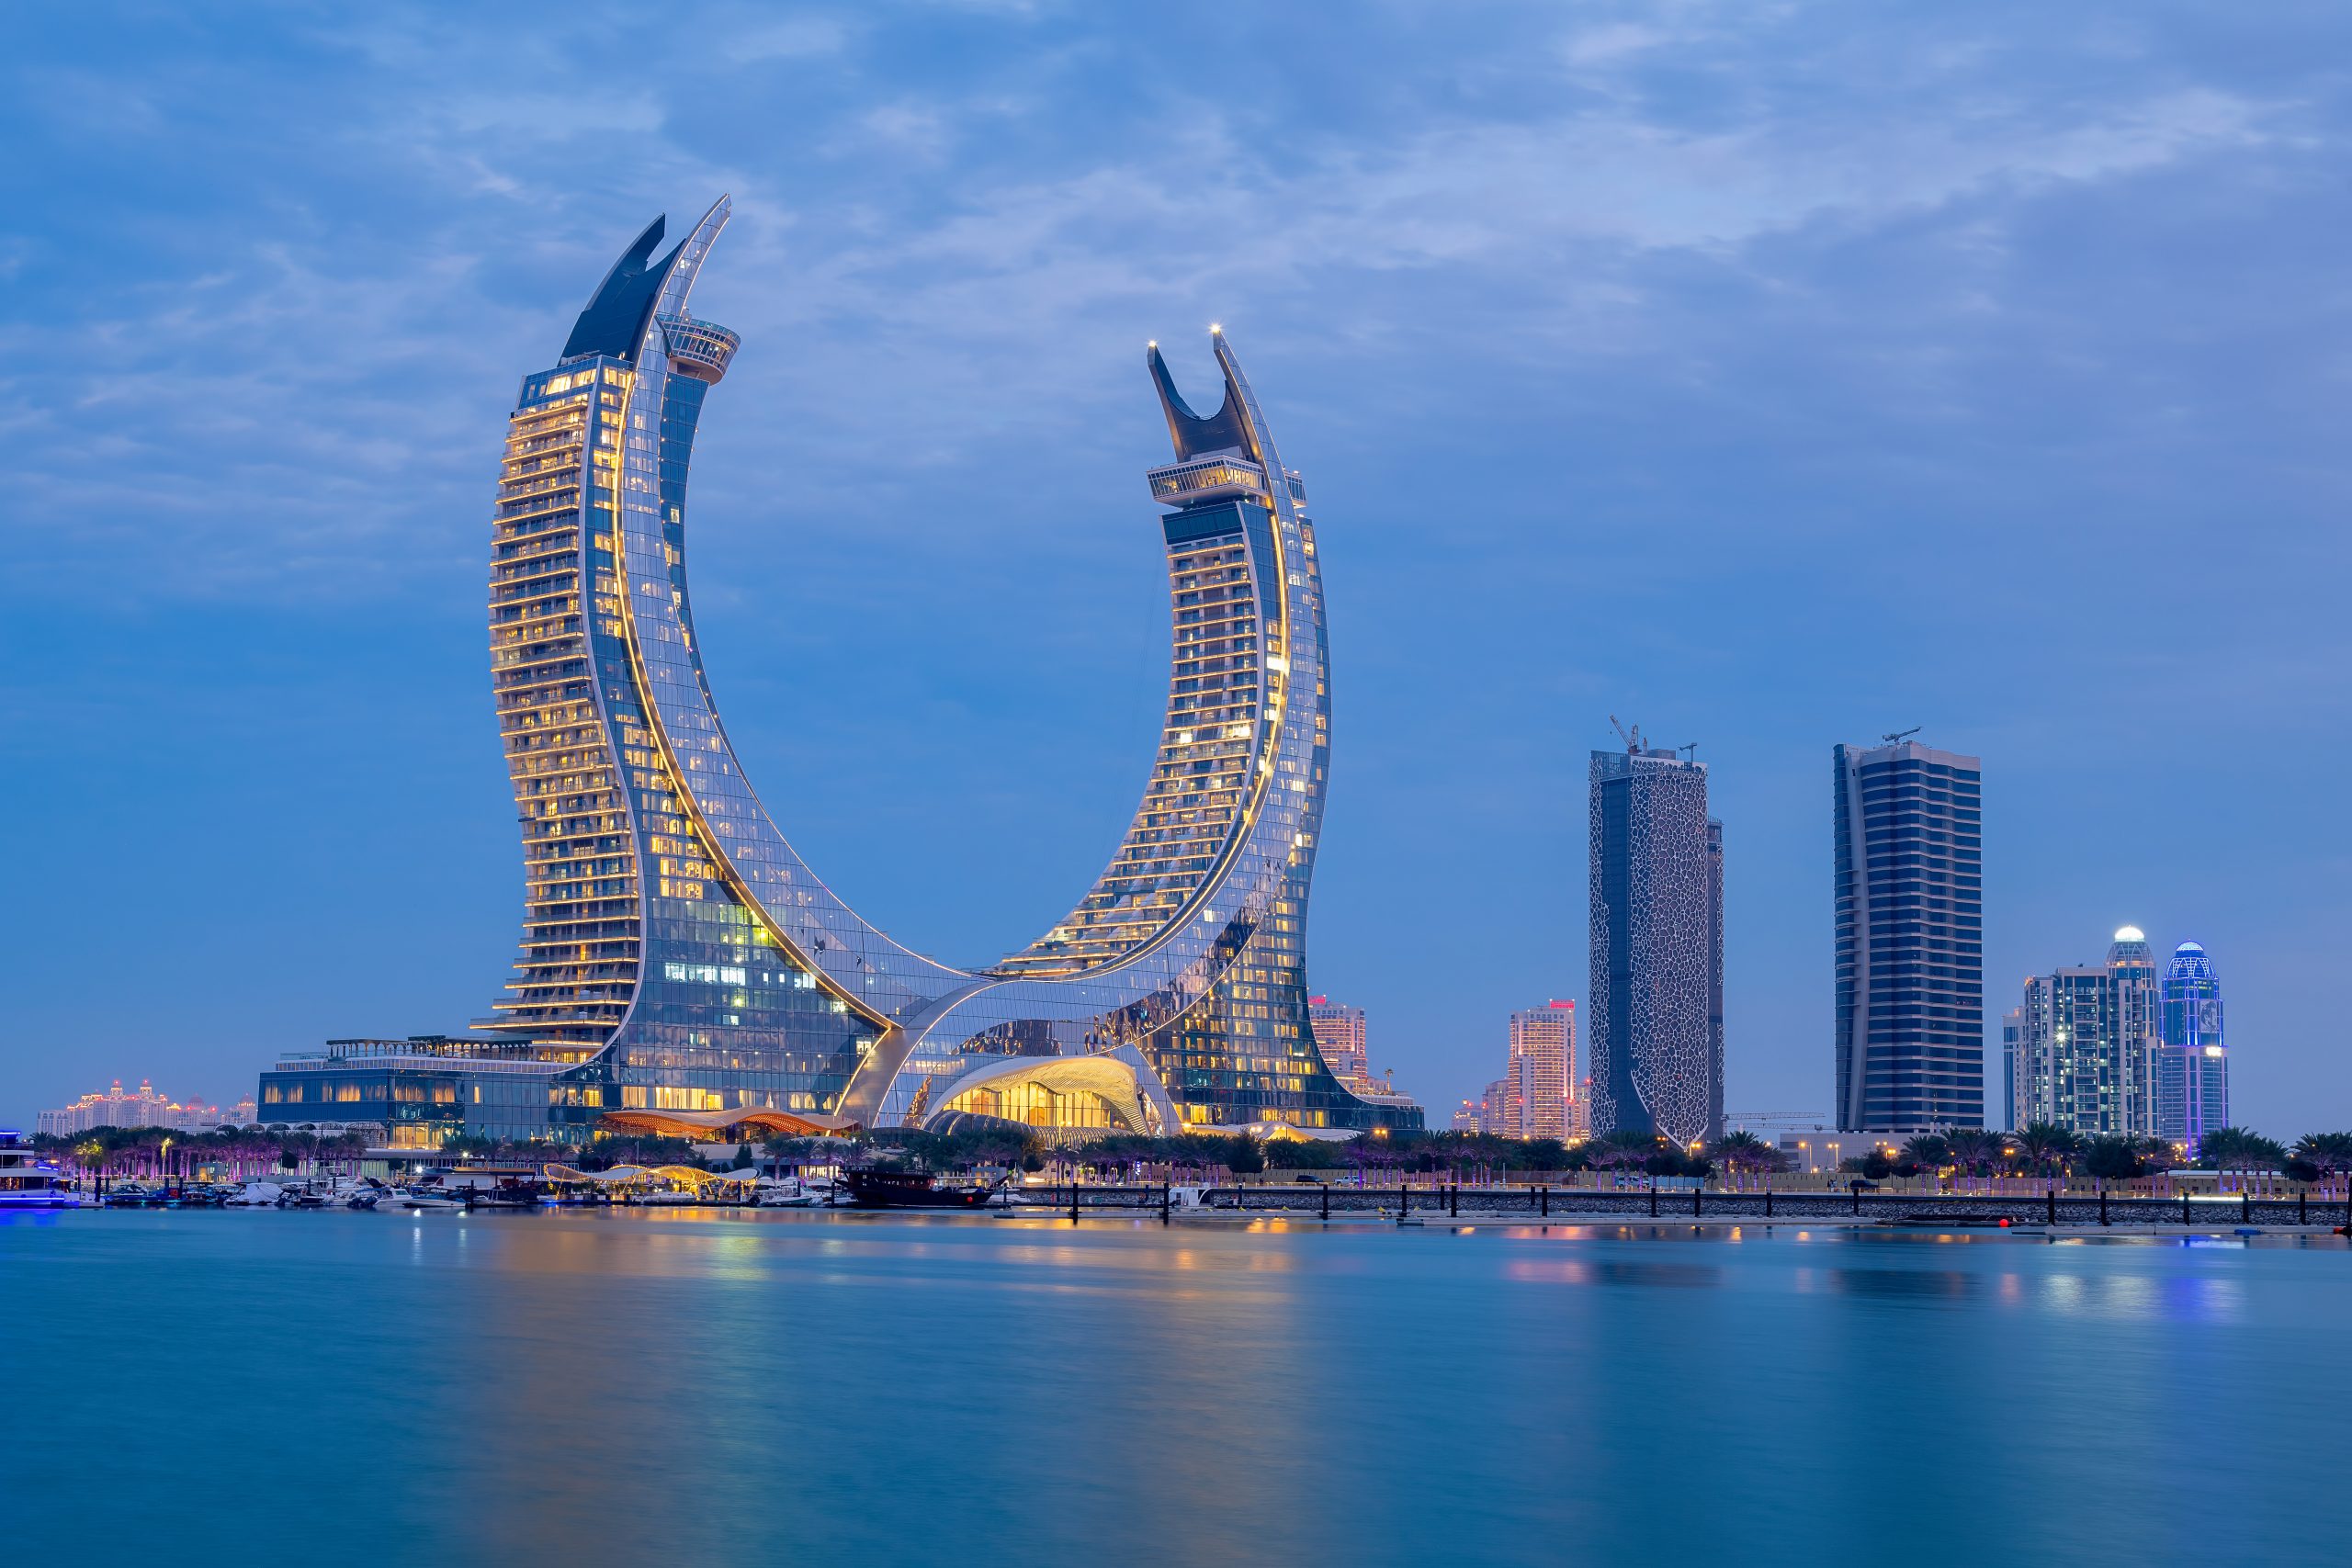 Information image that shows the Katara Towers building, where a kaleidoscope has been created with DV-LED display technology.